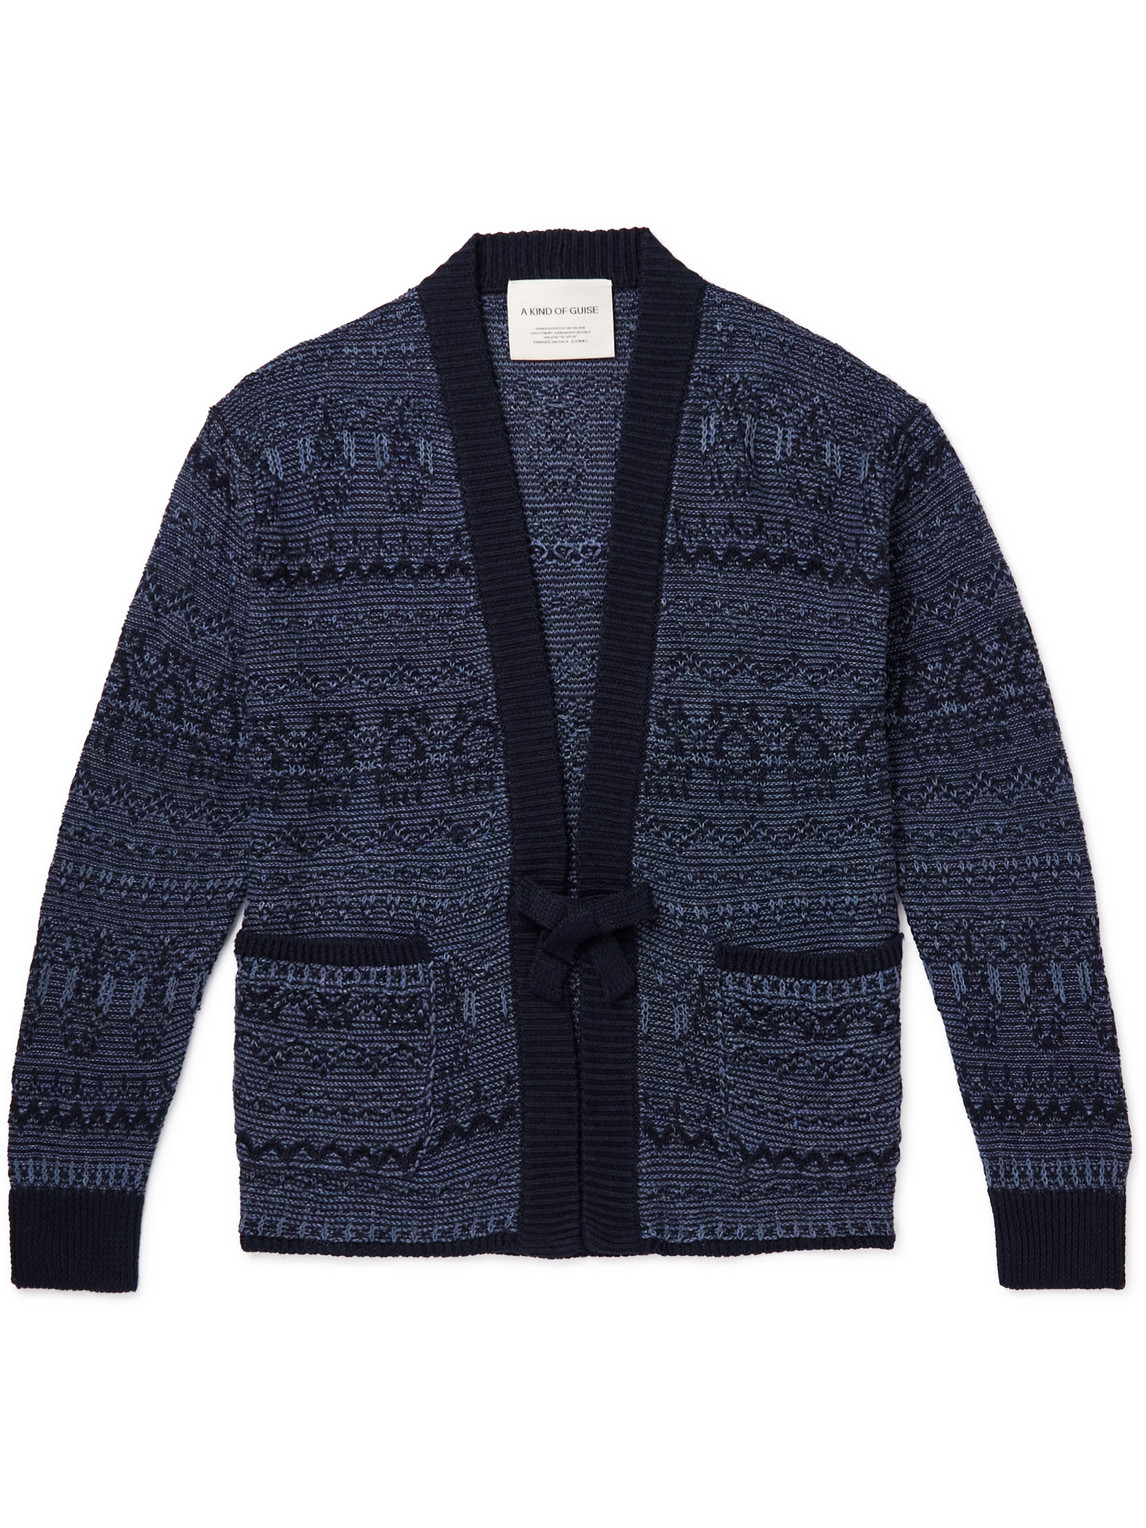 A Kind Of Guise Jacquard-knit Linen And Merino Wool-blend Cardigan In Blue